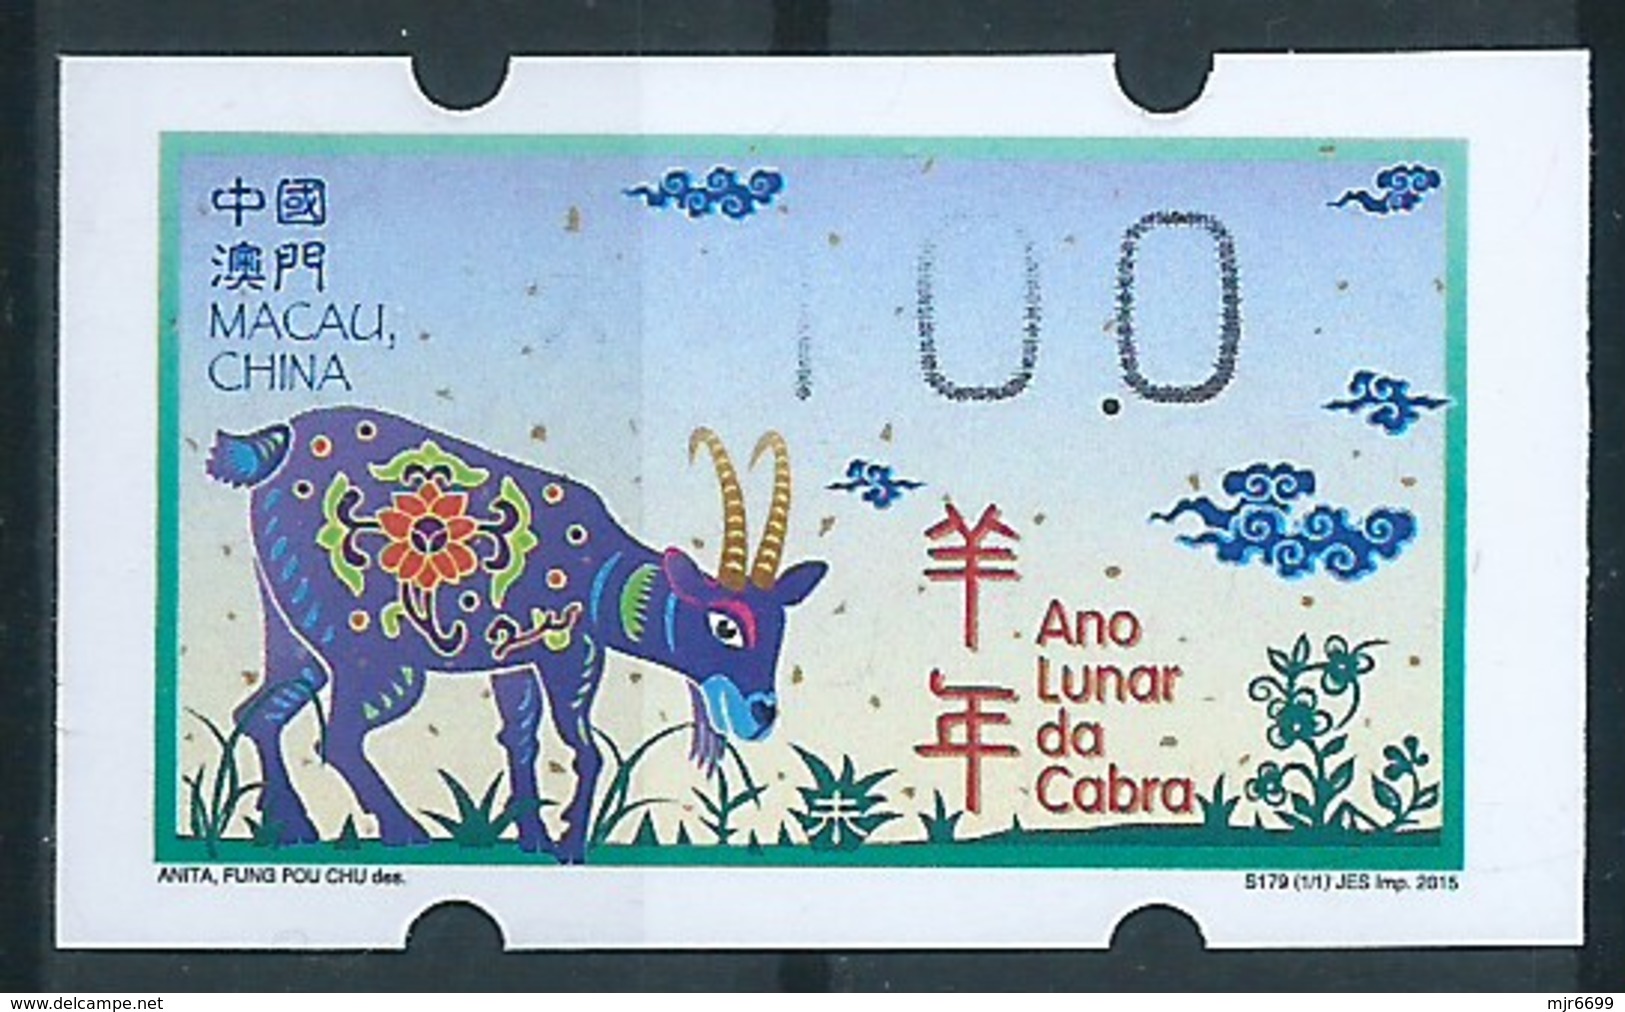 MACAU 2015 LUNAR NEW YEAR OF THE GOAT ATM LABELS ERROR PRINT - PARTLY NO INK PRINT, ALMOST MISSING '1' & "STARS" - Automaten